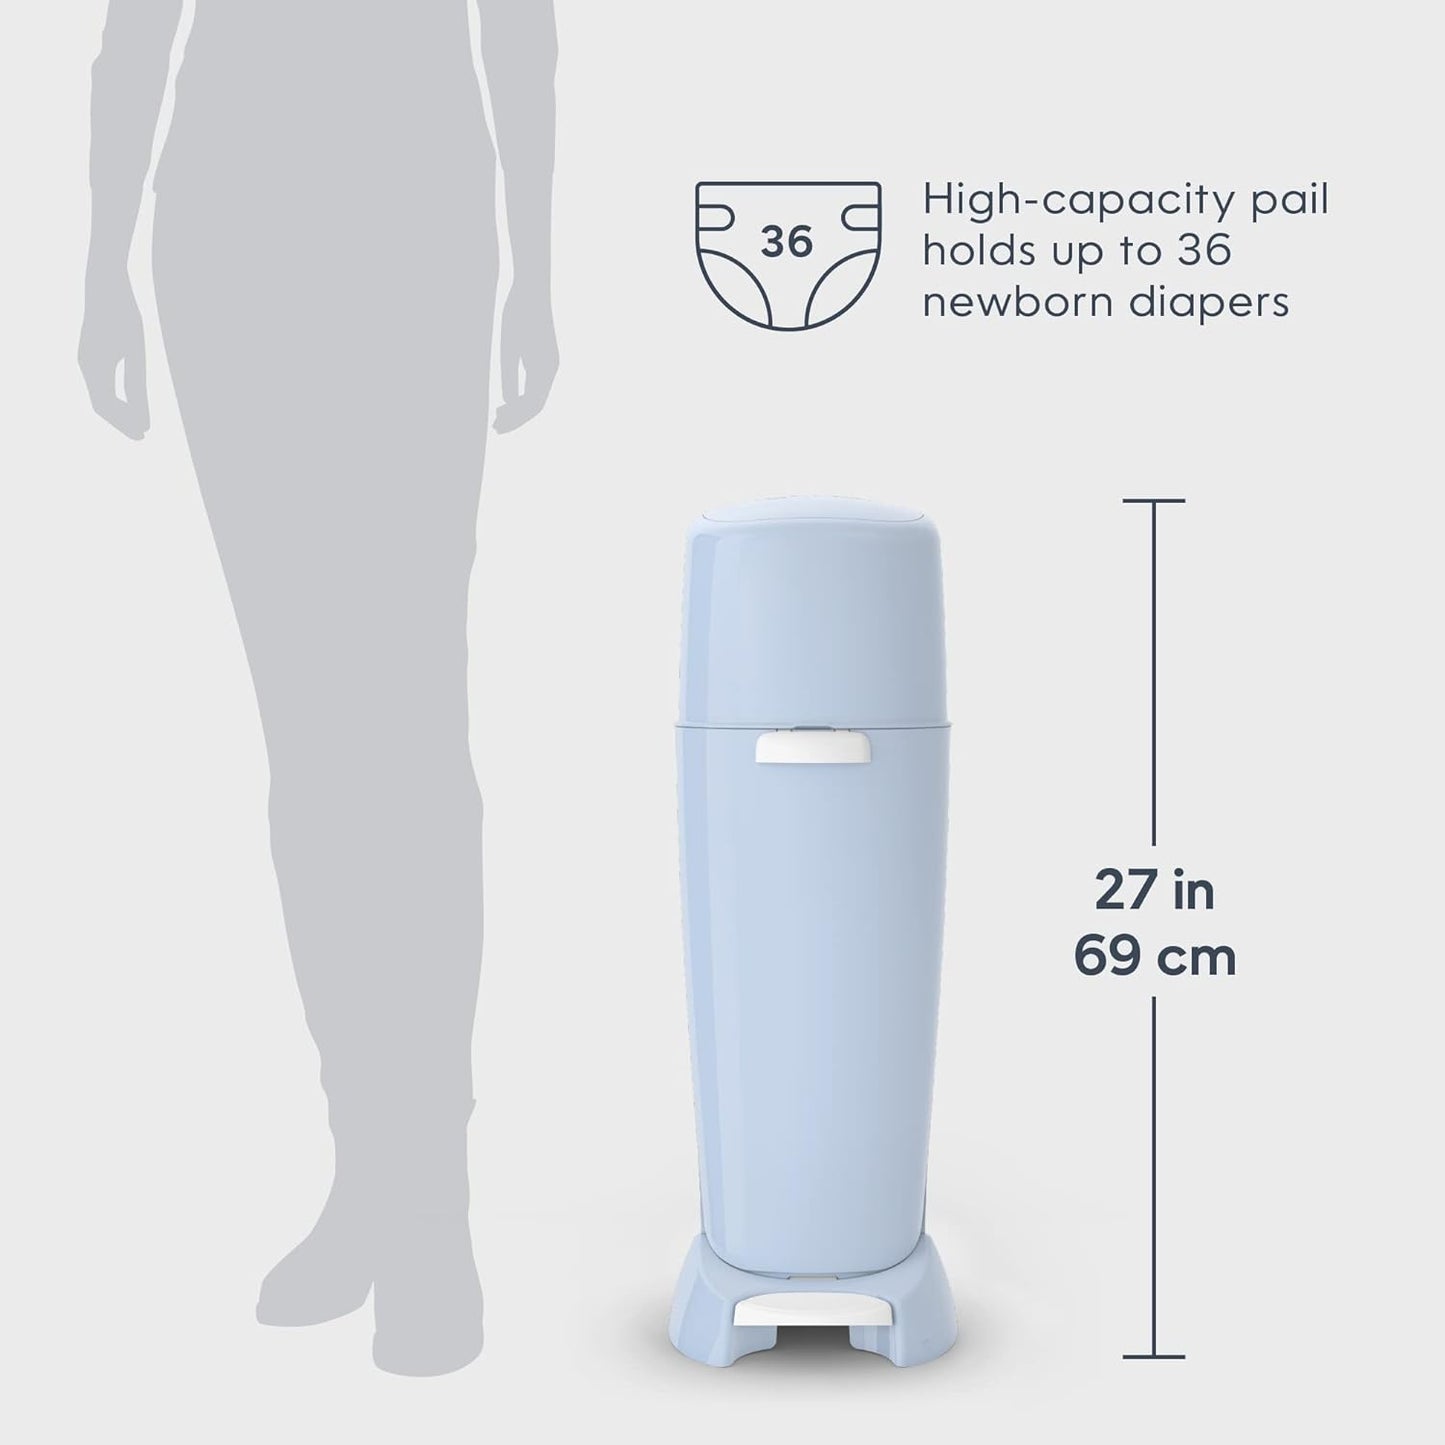 Diaper Genie Complete Diaper Pail (White) with Antimicrobial Odor Control | Includes 1 Diaper Trash Can, 1 Refill Bags, 1 Carbon Filter, Packaging may vary